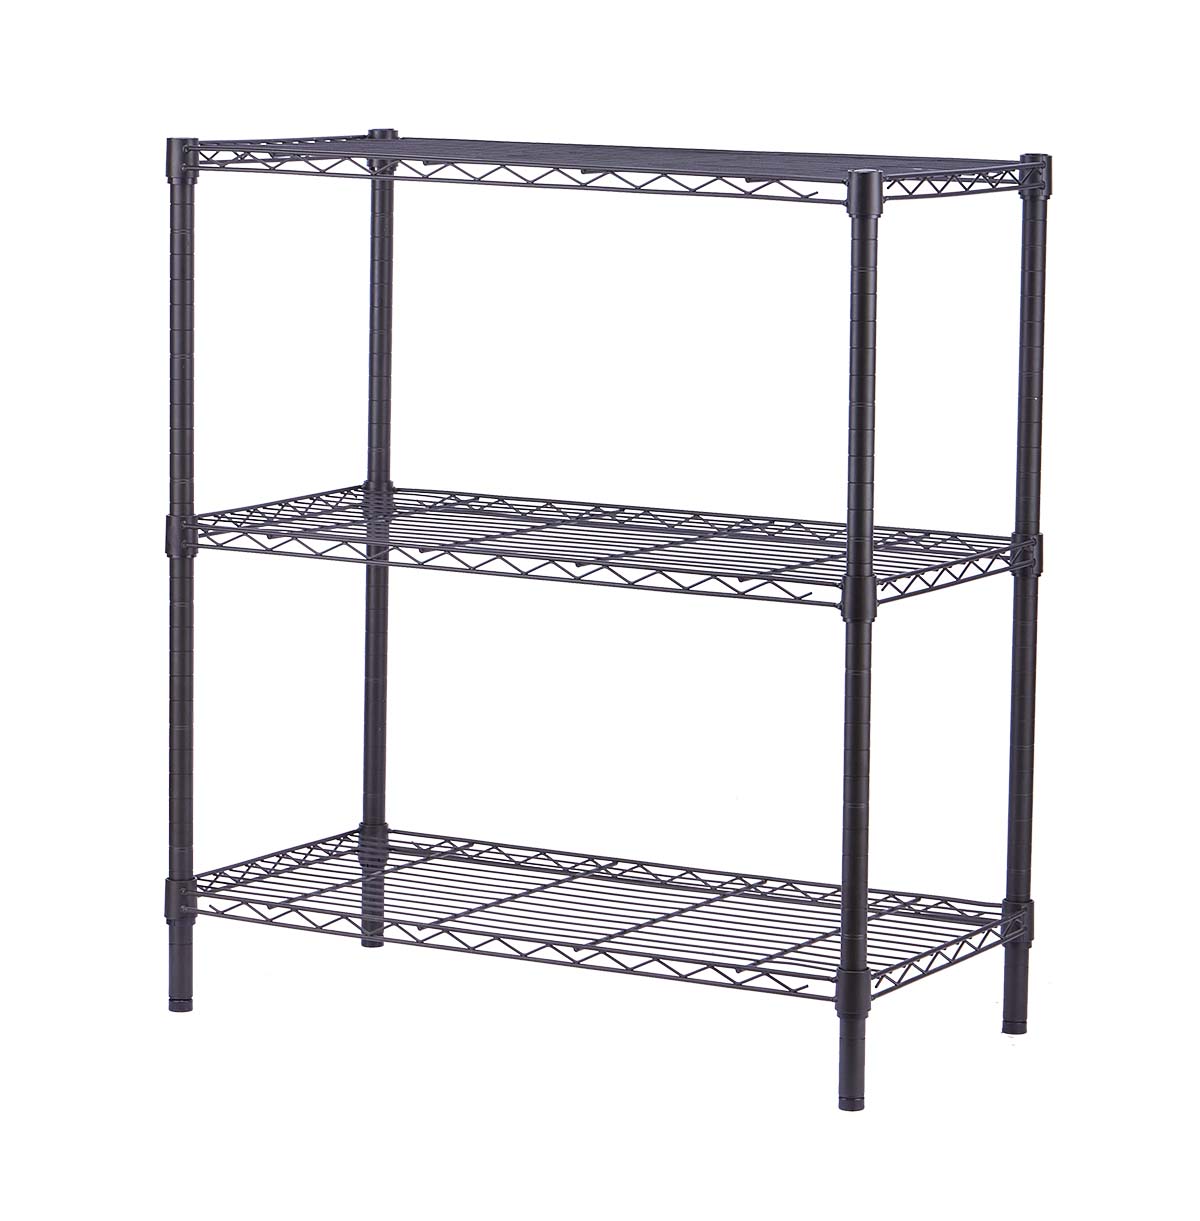 wire shelving unit covers